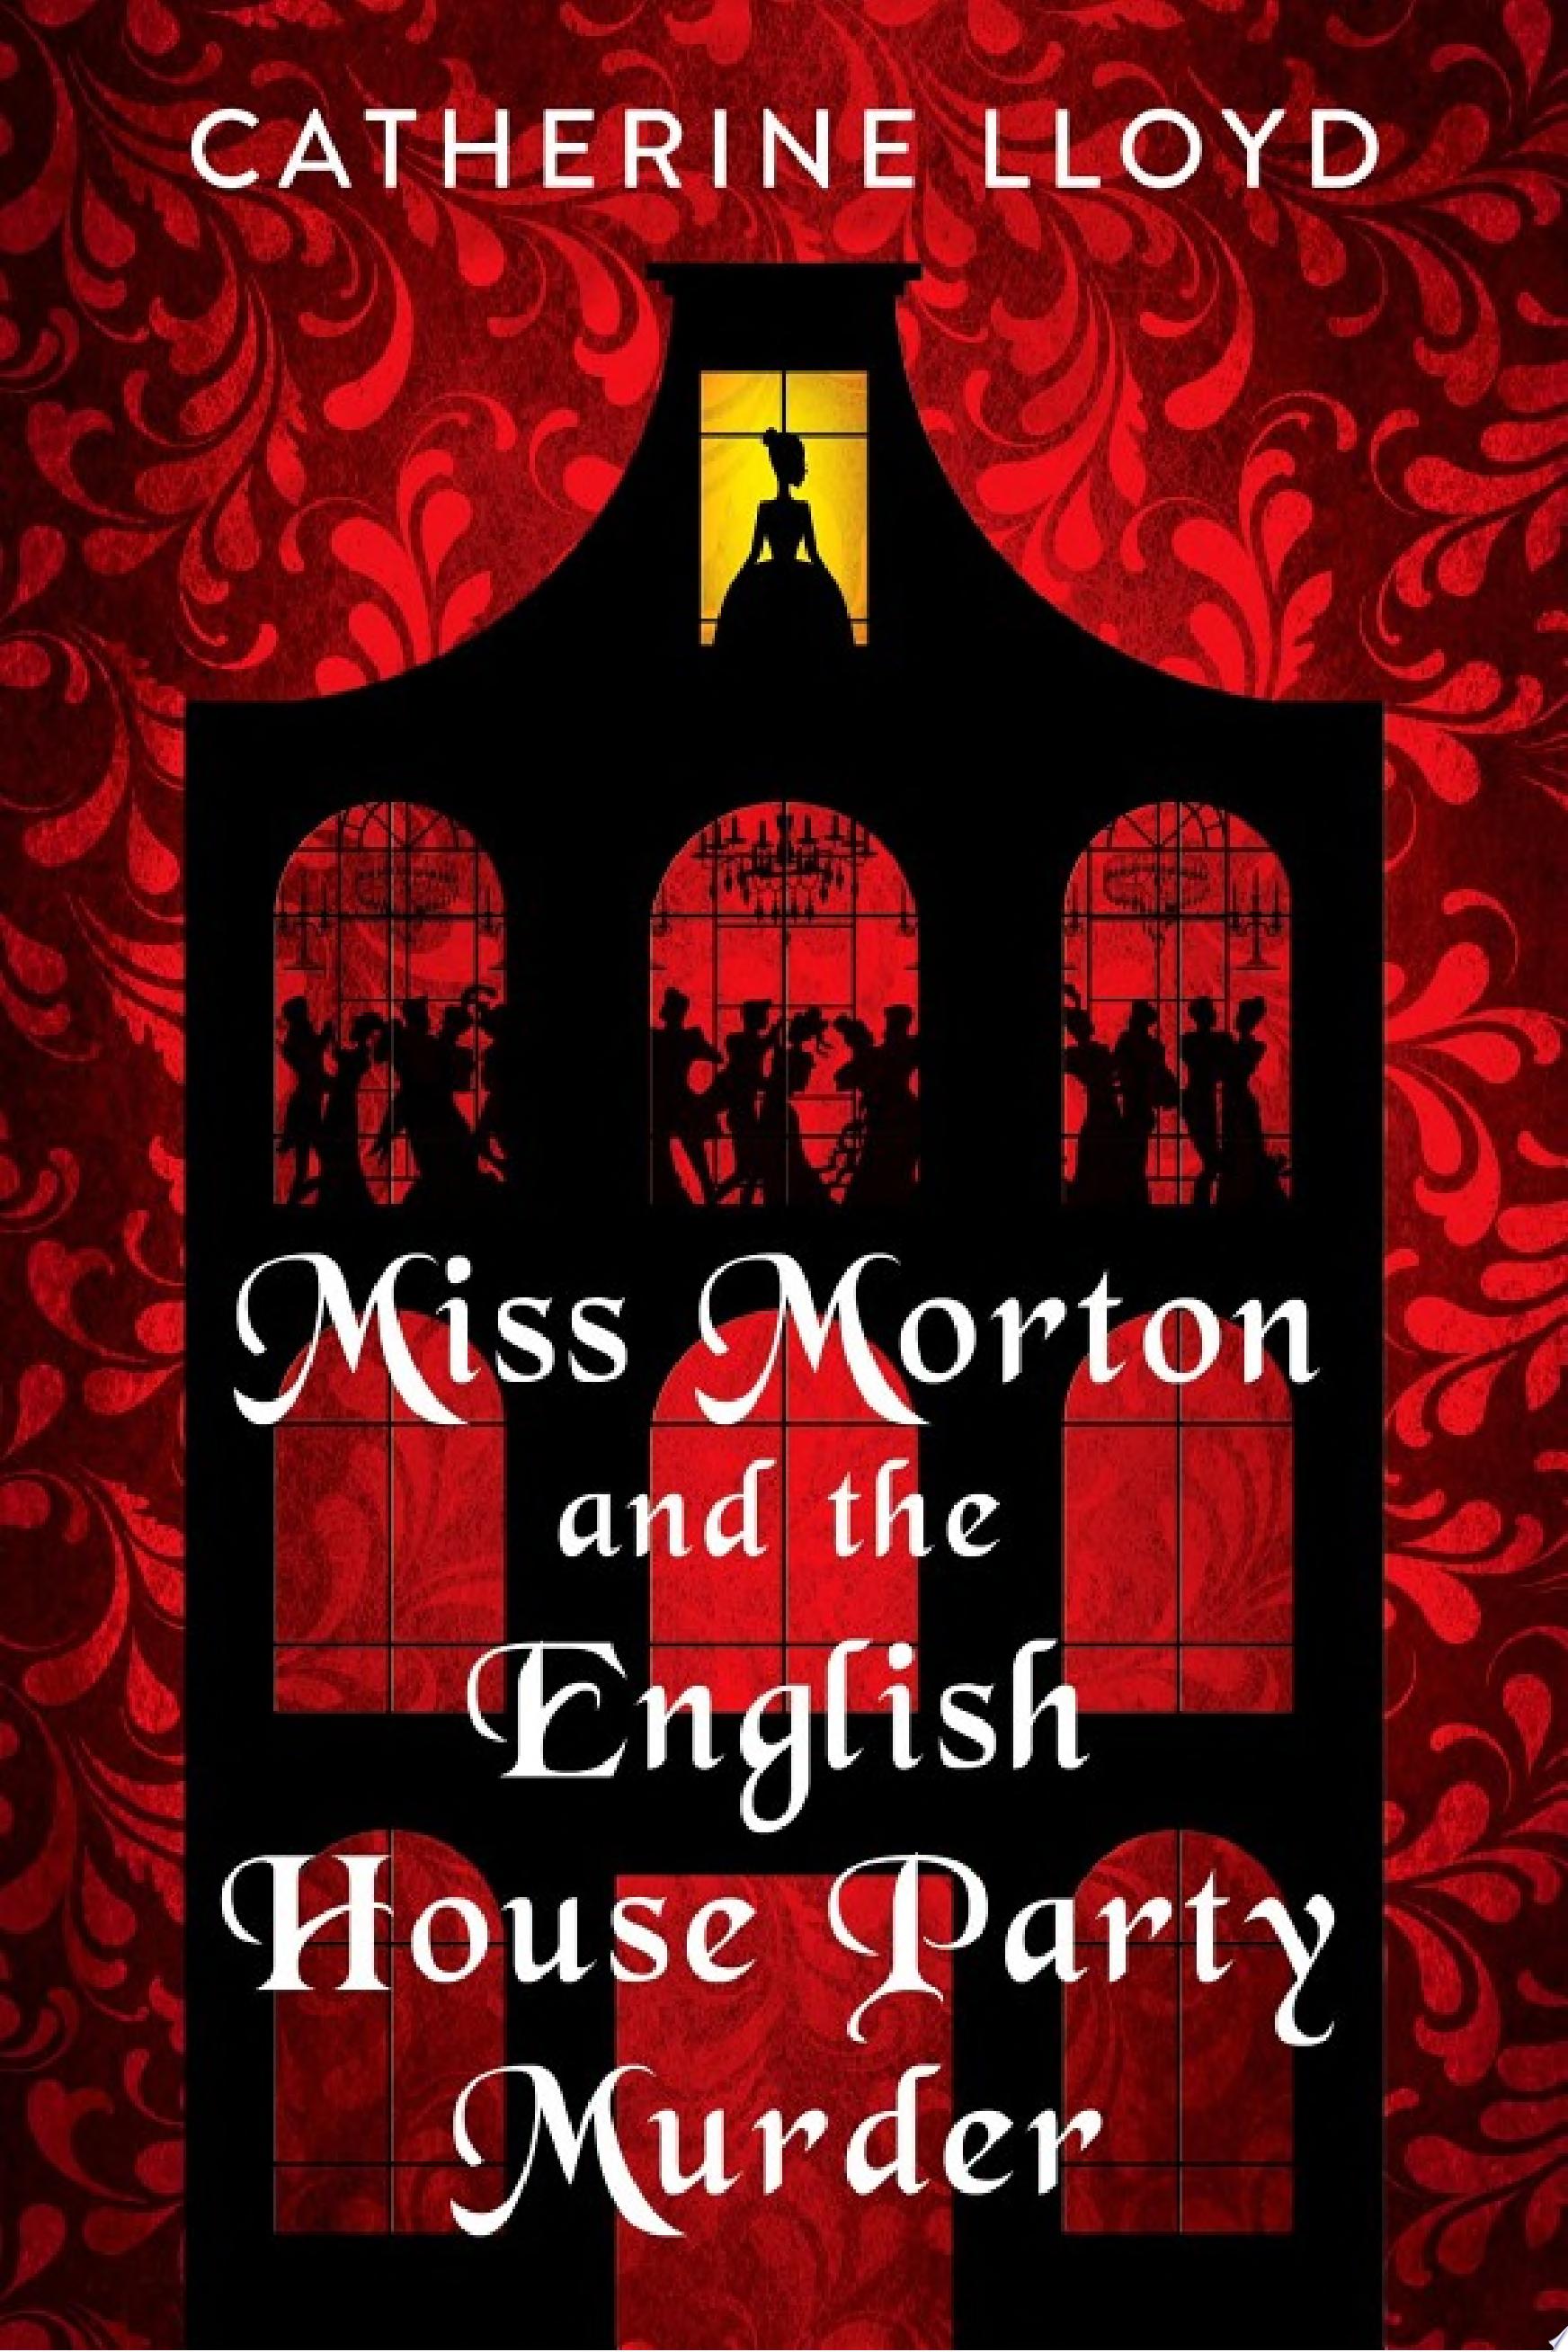 Image for "Miss Morton and the English House Party Murder"